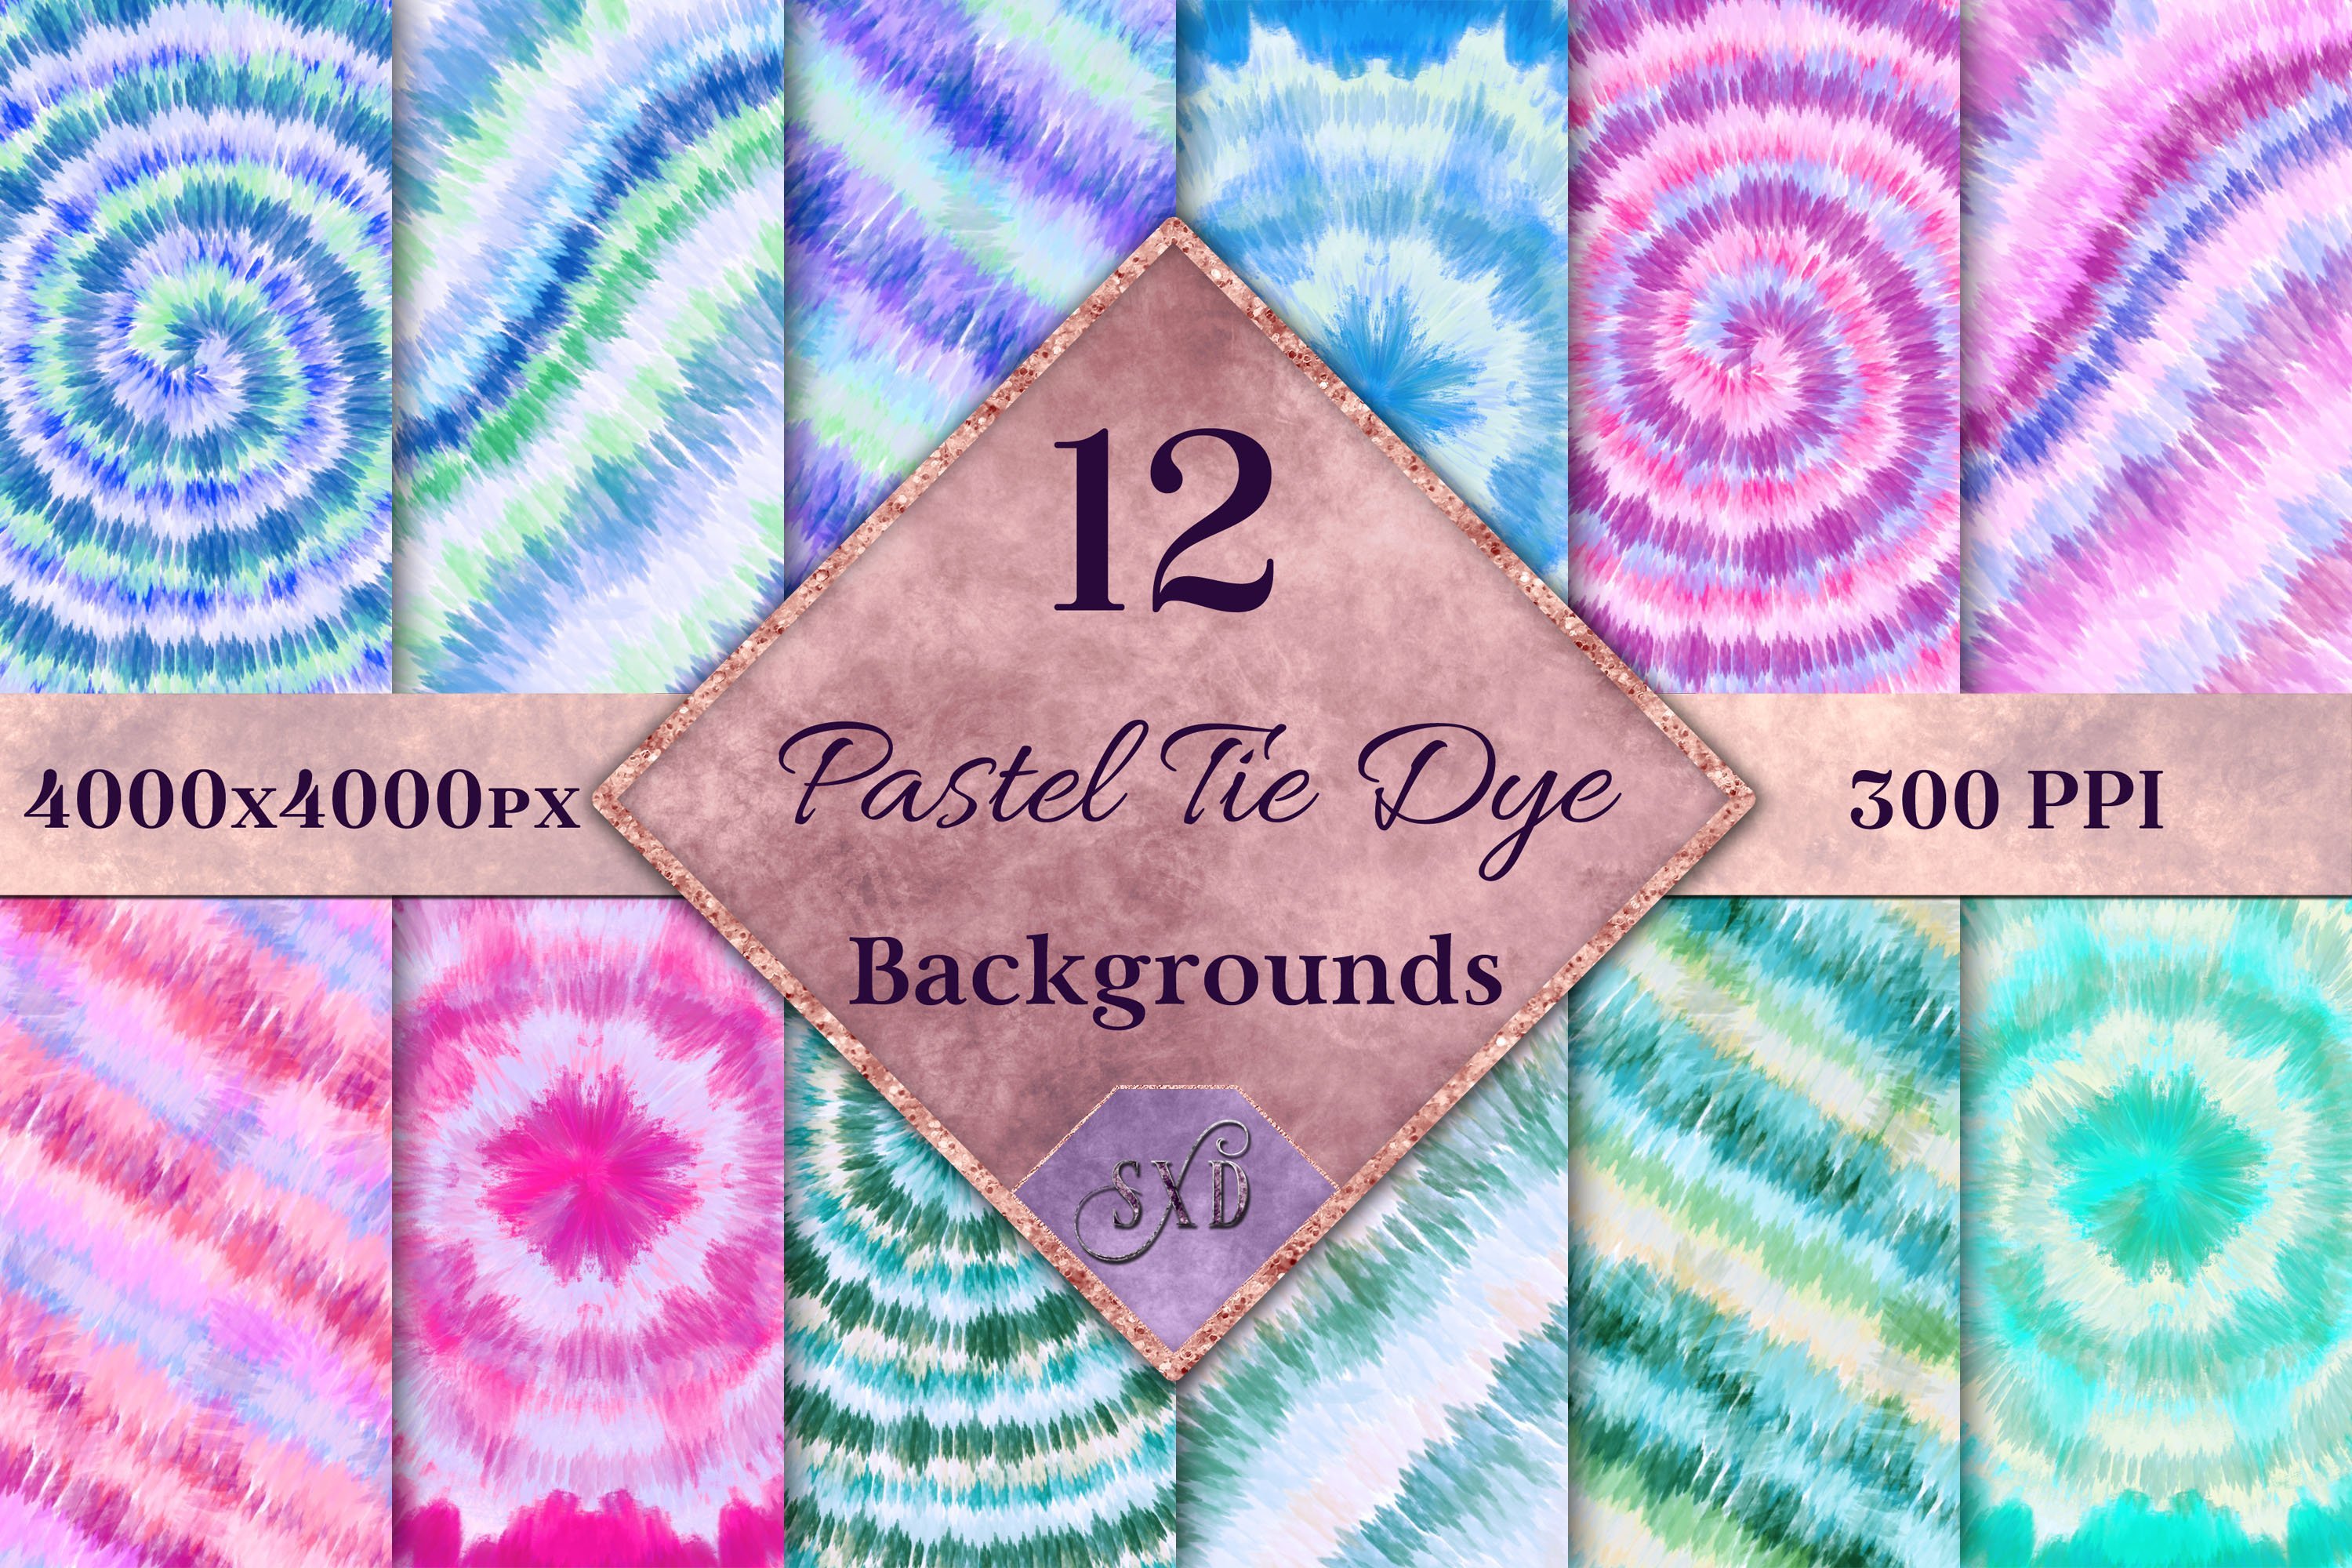 Pastel Tie Dye Backgrounds cover image.